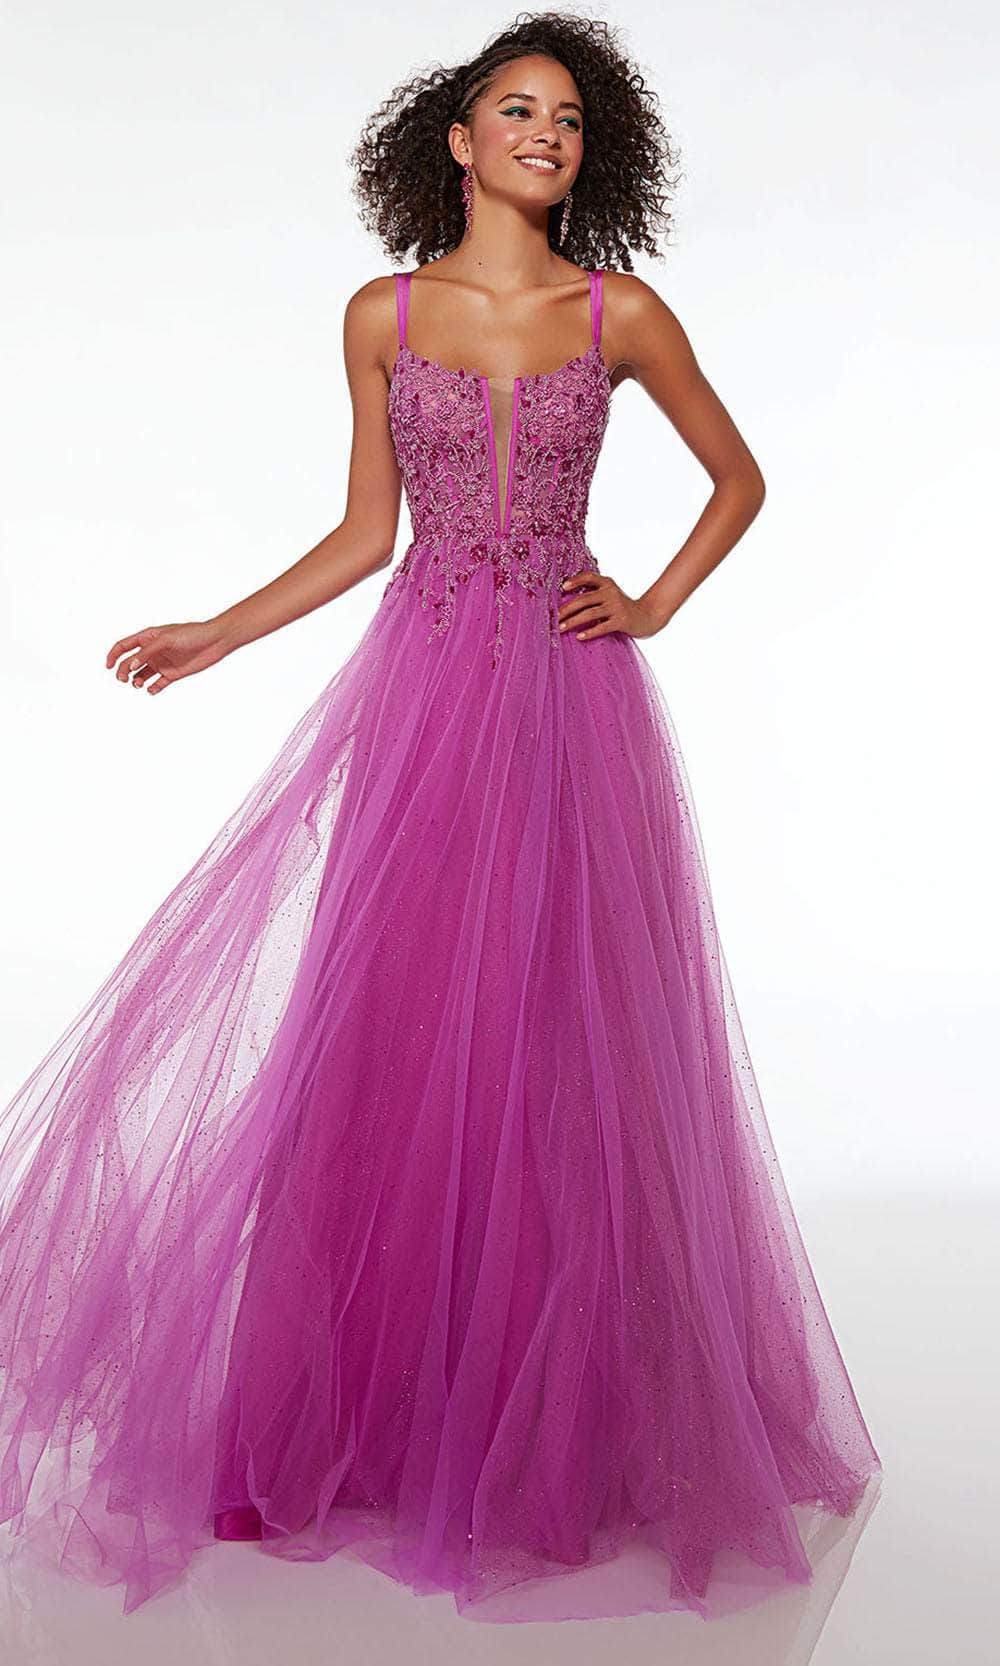 Image of Alyce Paris 61513 - Embroidered Sleeveless A-line Prom Dress